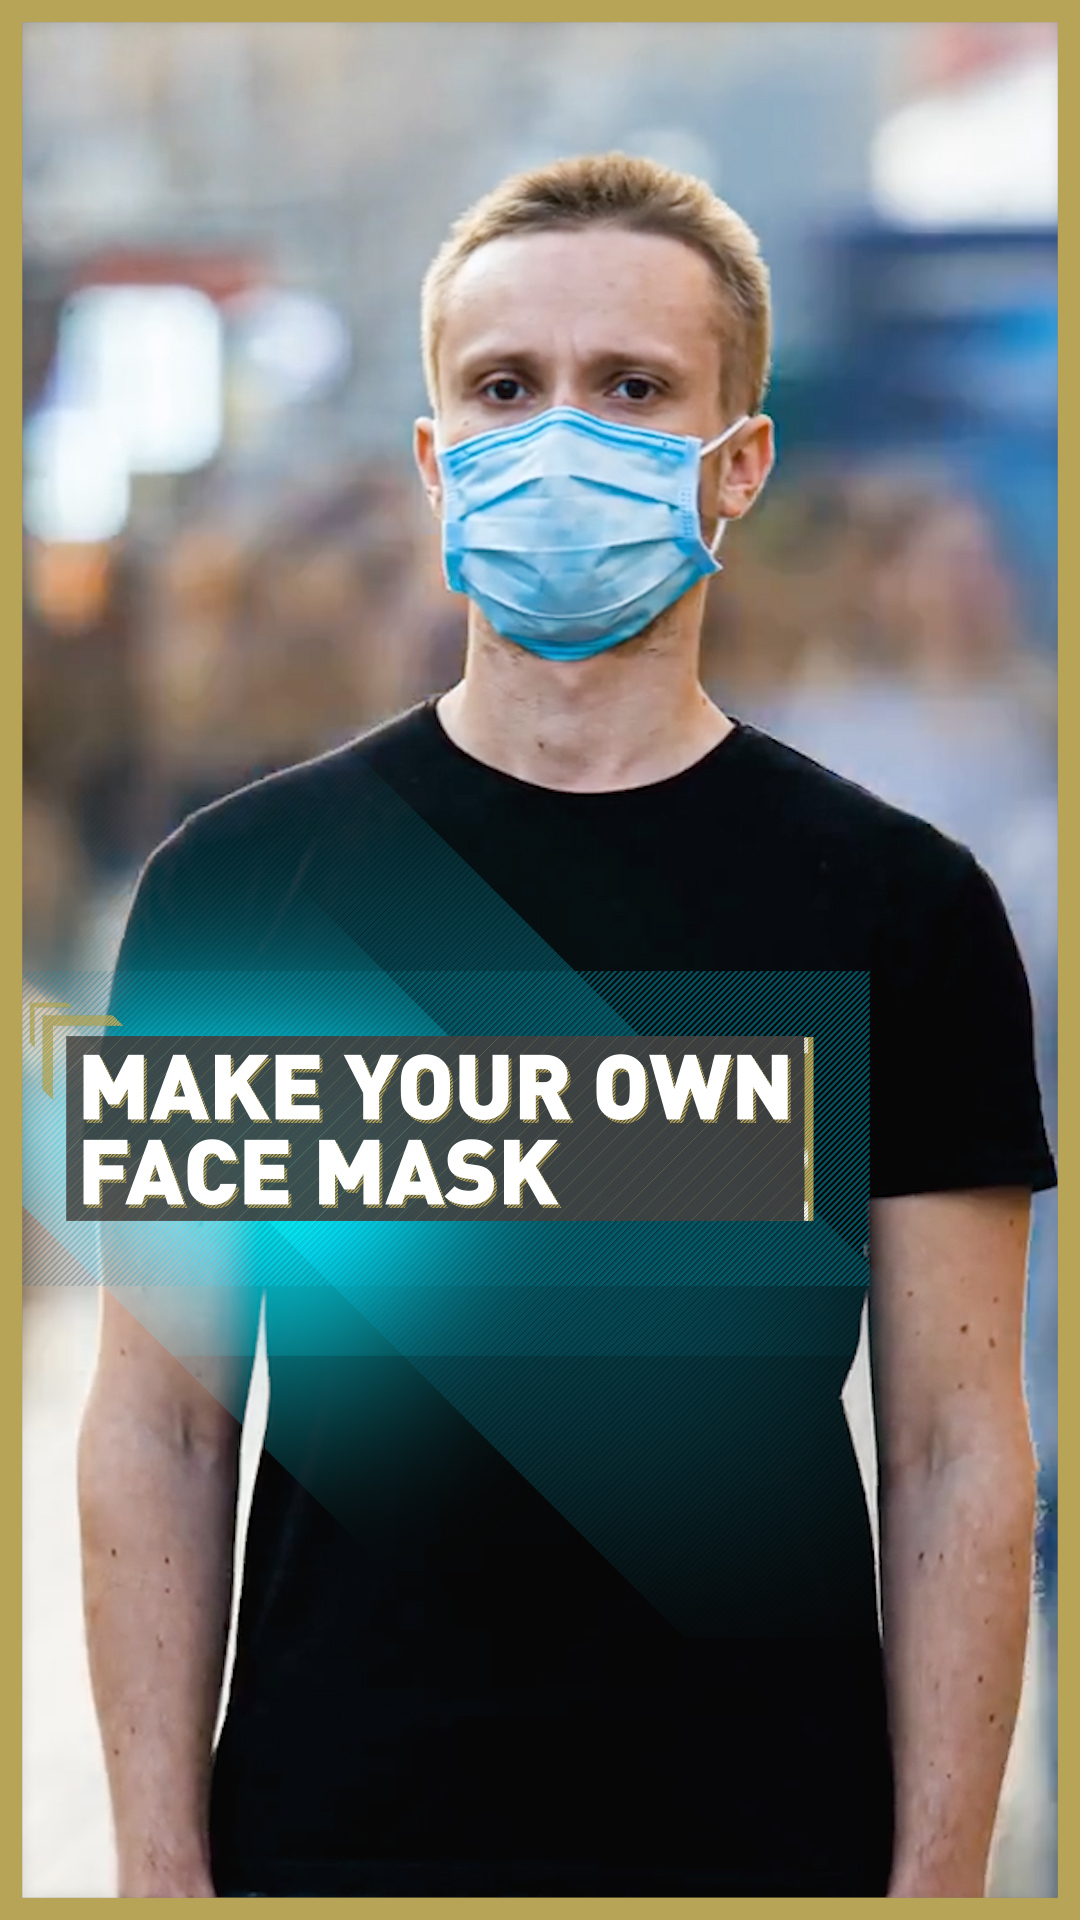 How to make your own 'last resort' face mask - CGTN